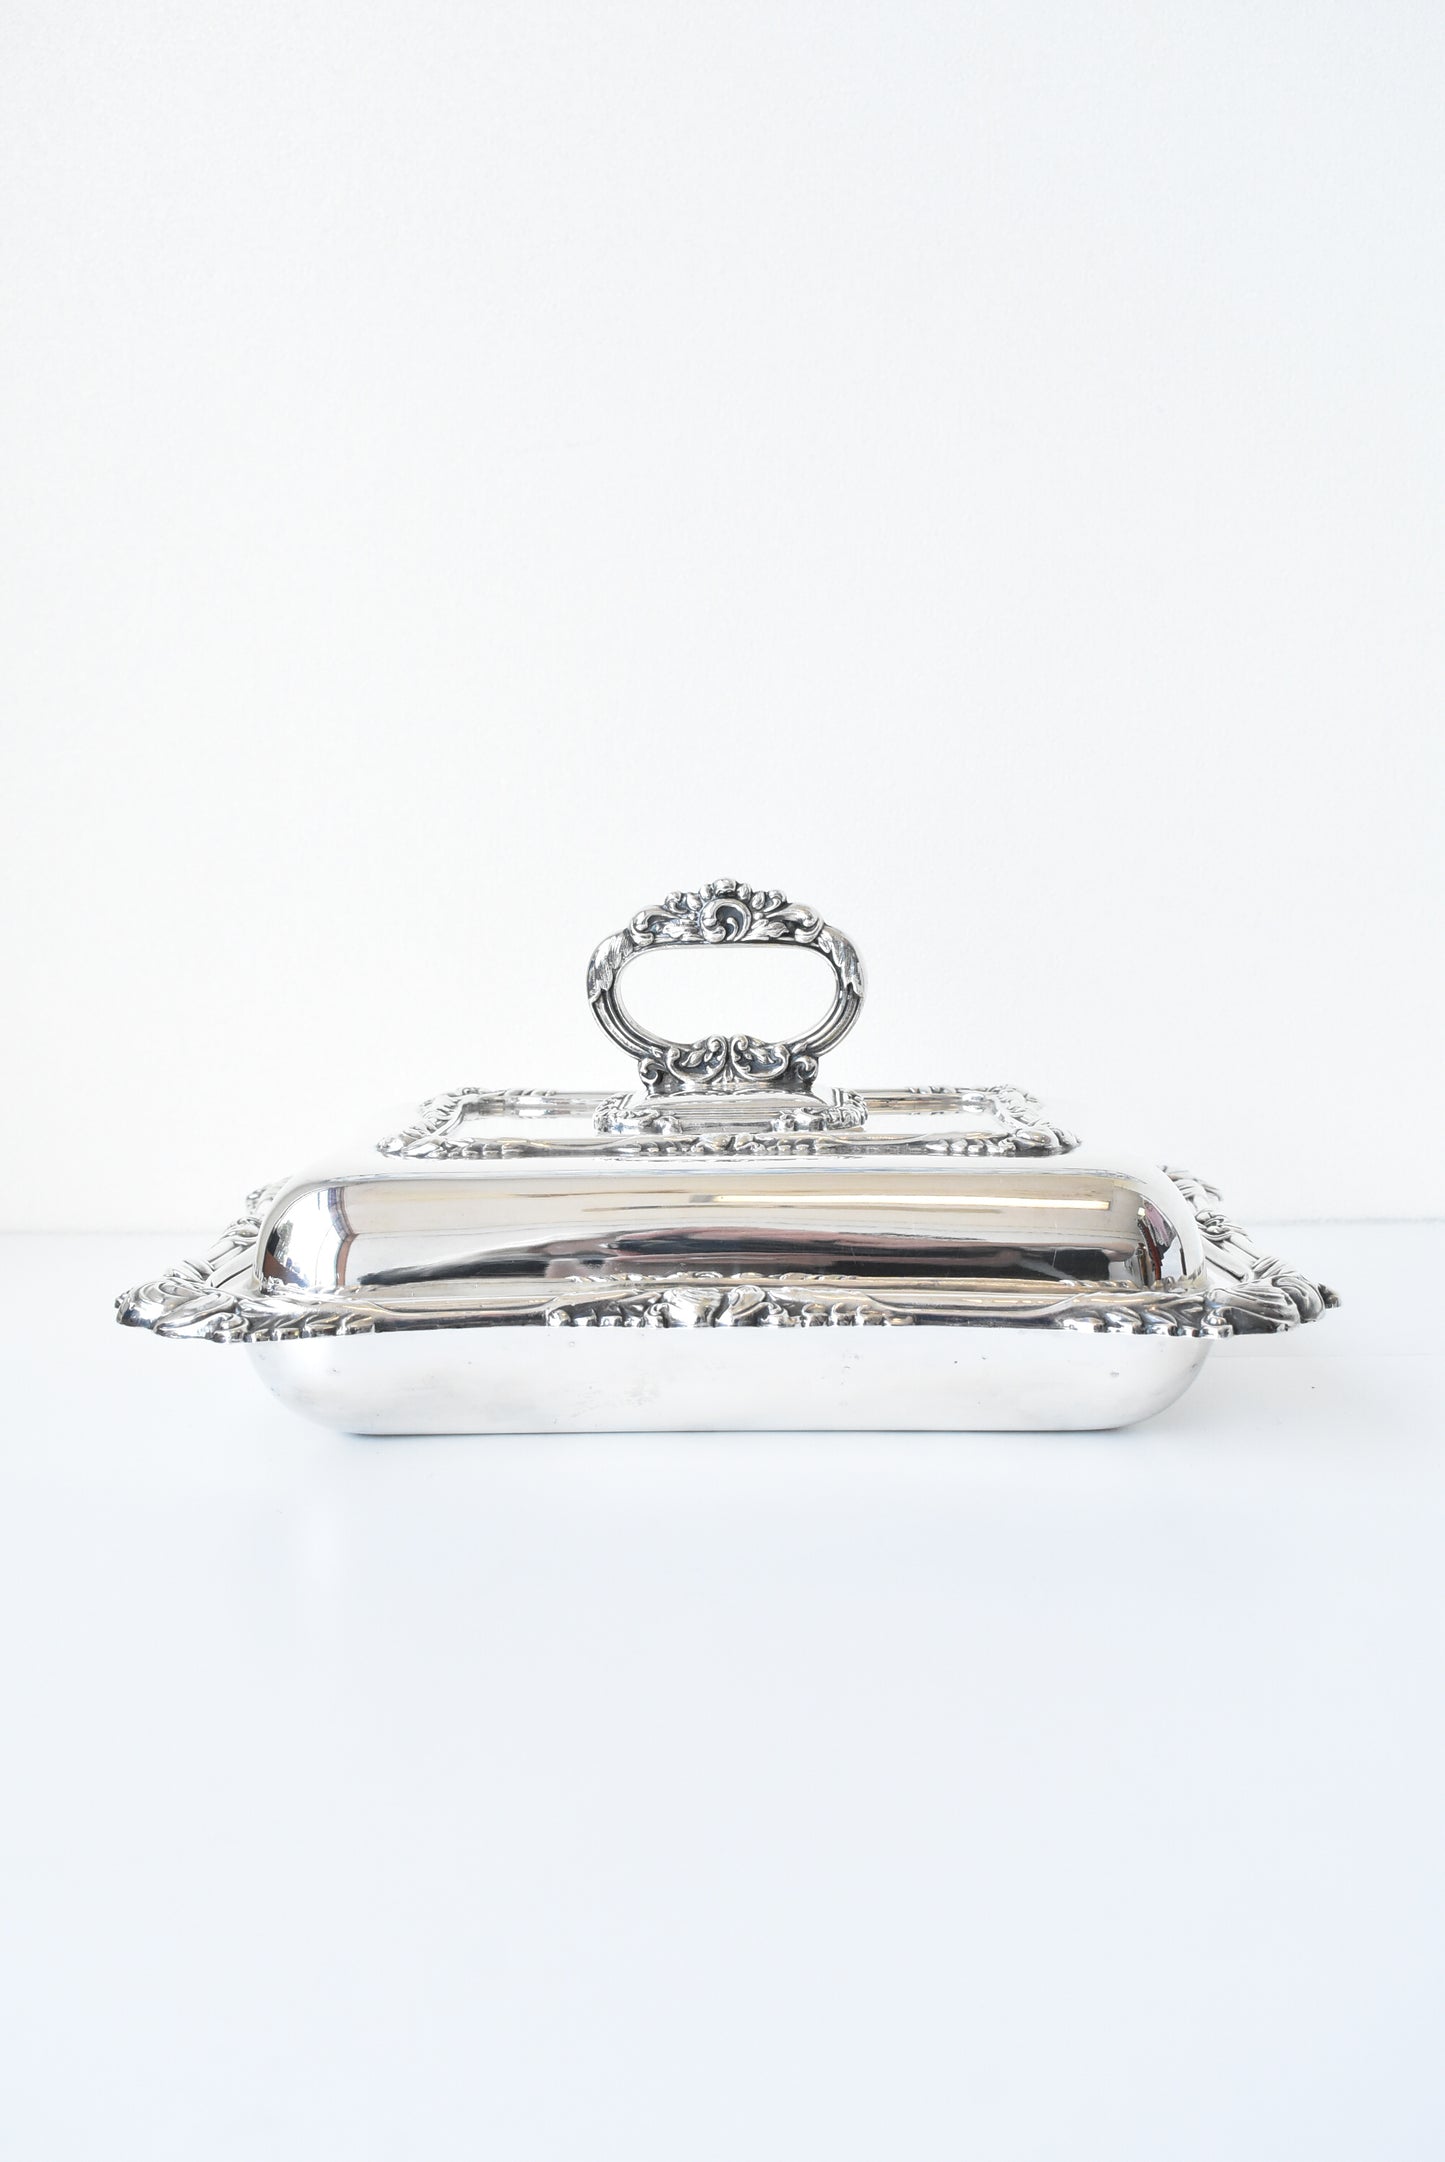 Stunning vintage silver serving dish with lid